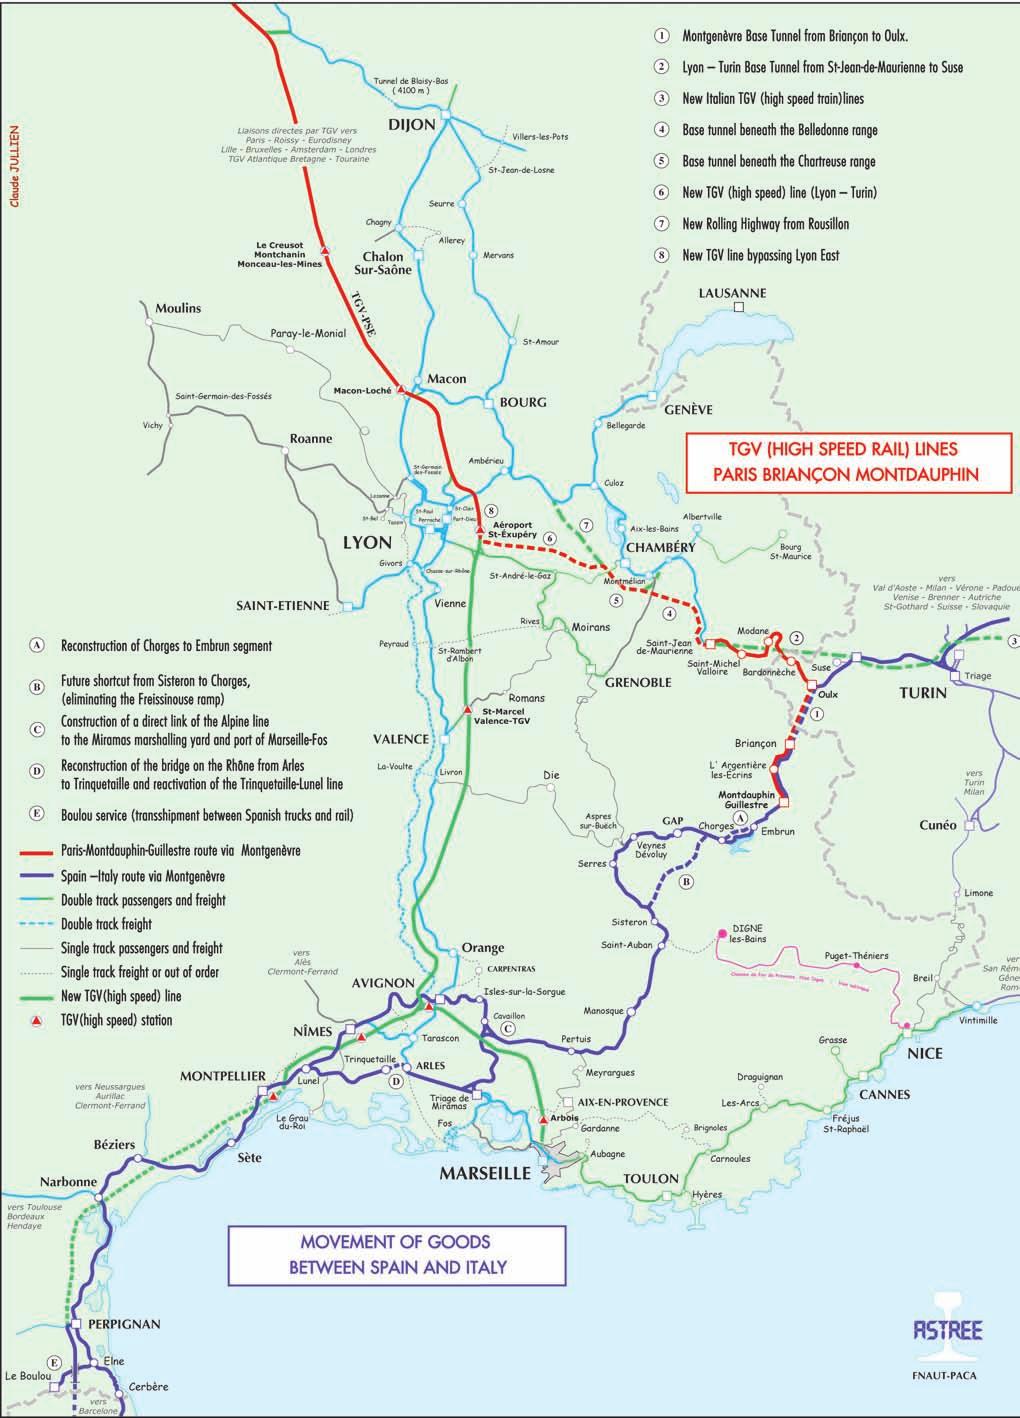 The Durance Valley Piedmont Rail link The Durance Valley Piedmont rail link via the Montgenèvre Tunnel meets specific and complementary services : improving access to the southern Alps for both